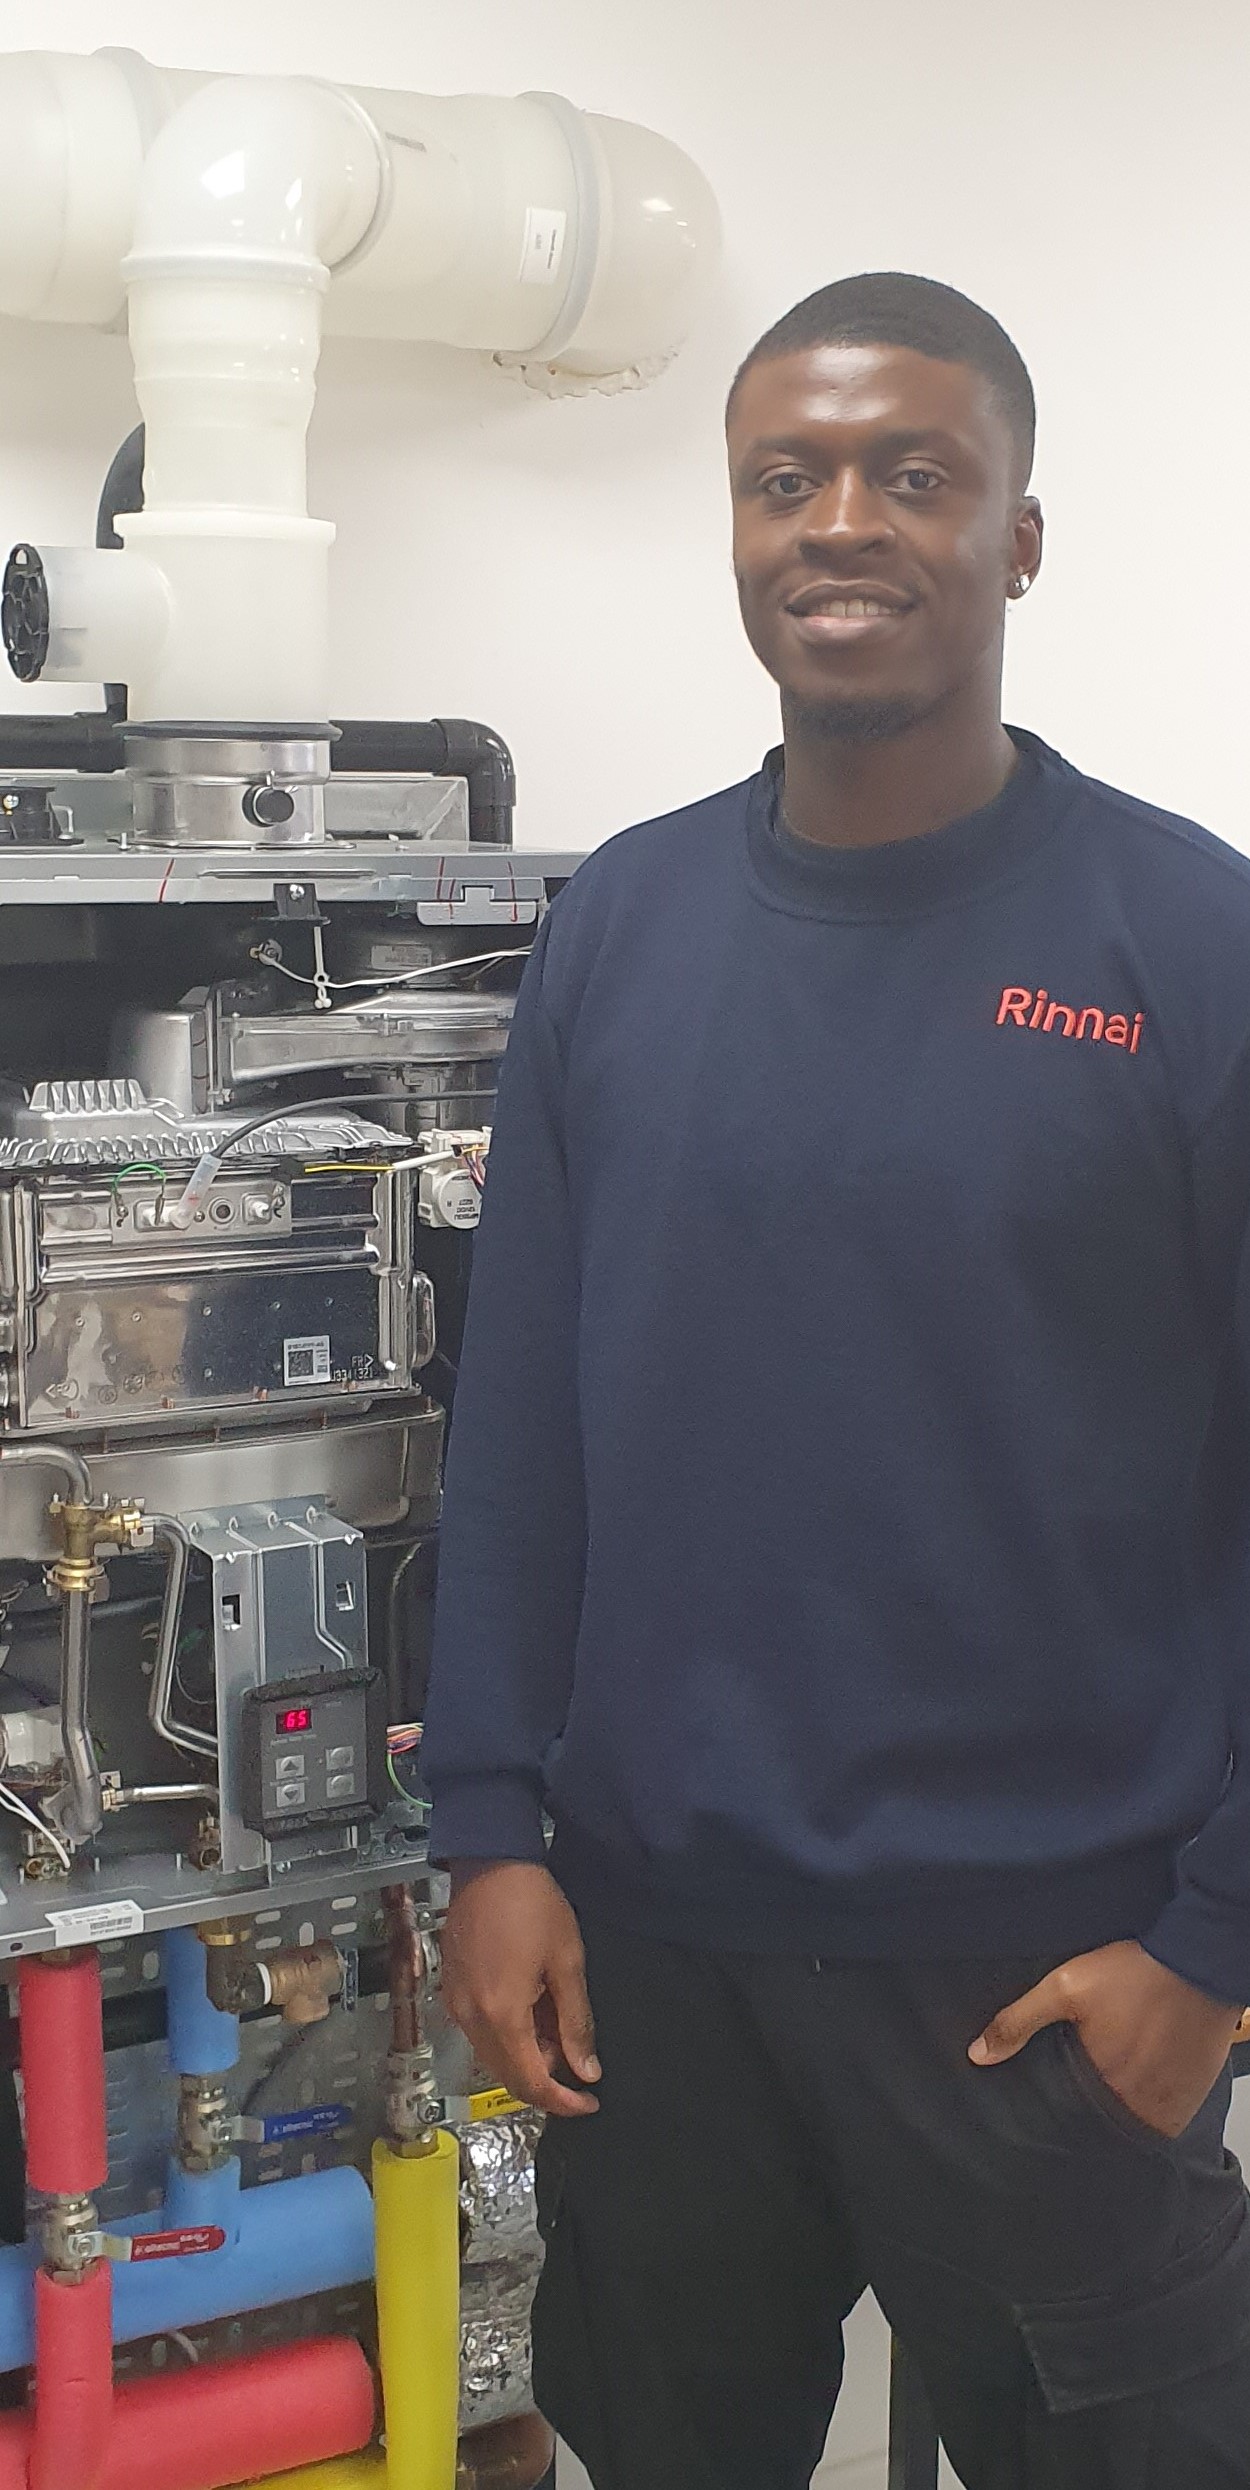 Rinnai Strengthens Technical Service Team With New London-Based Applications Engineer